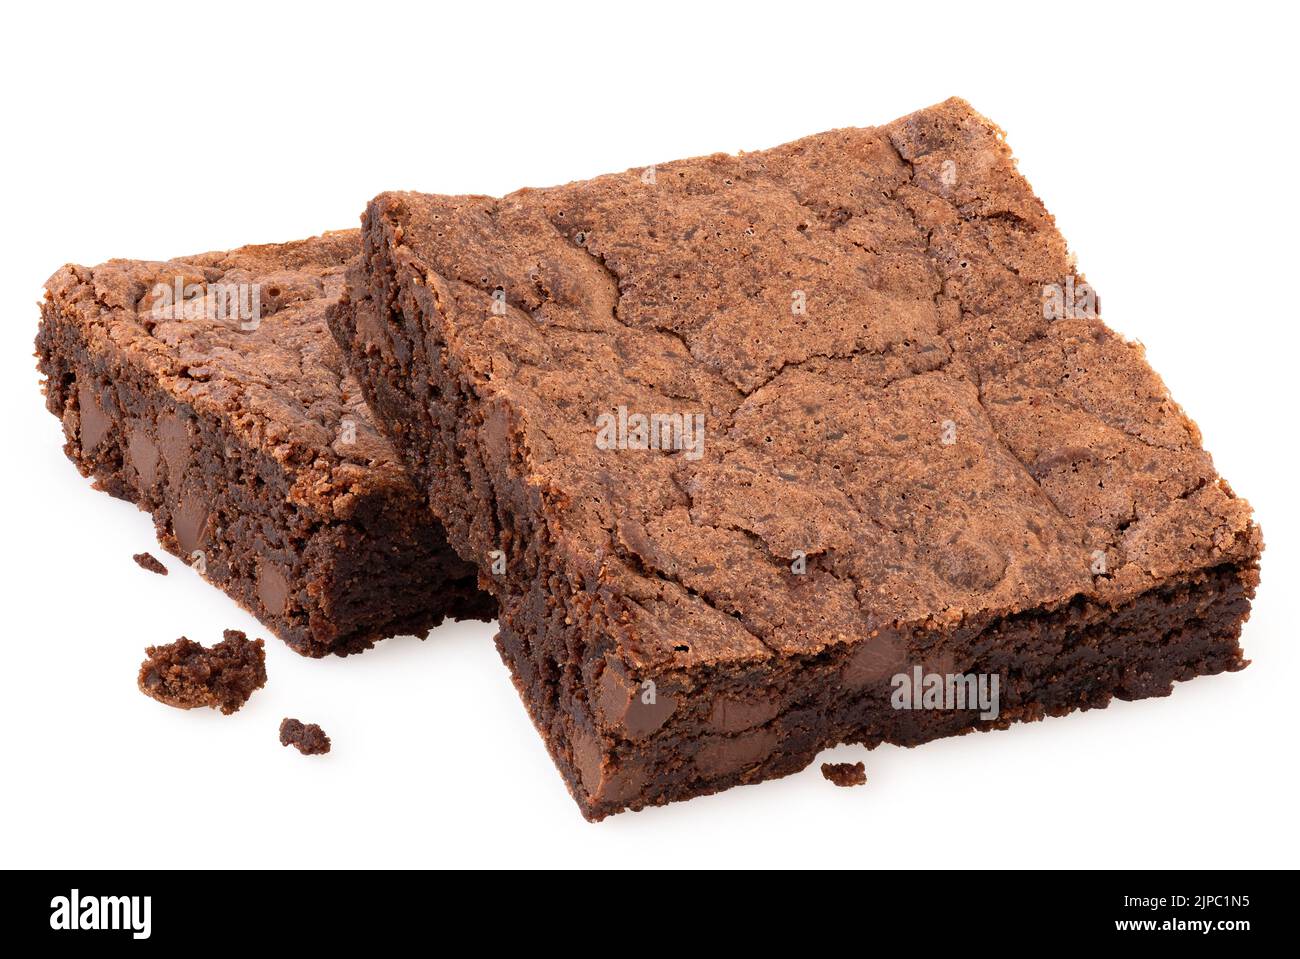 Two chocolate brownies with chocolate chips next to crumbs isolated on white. Stock Photo